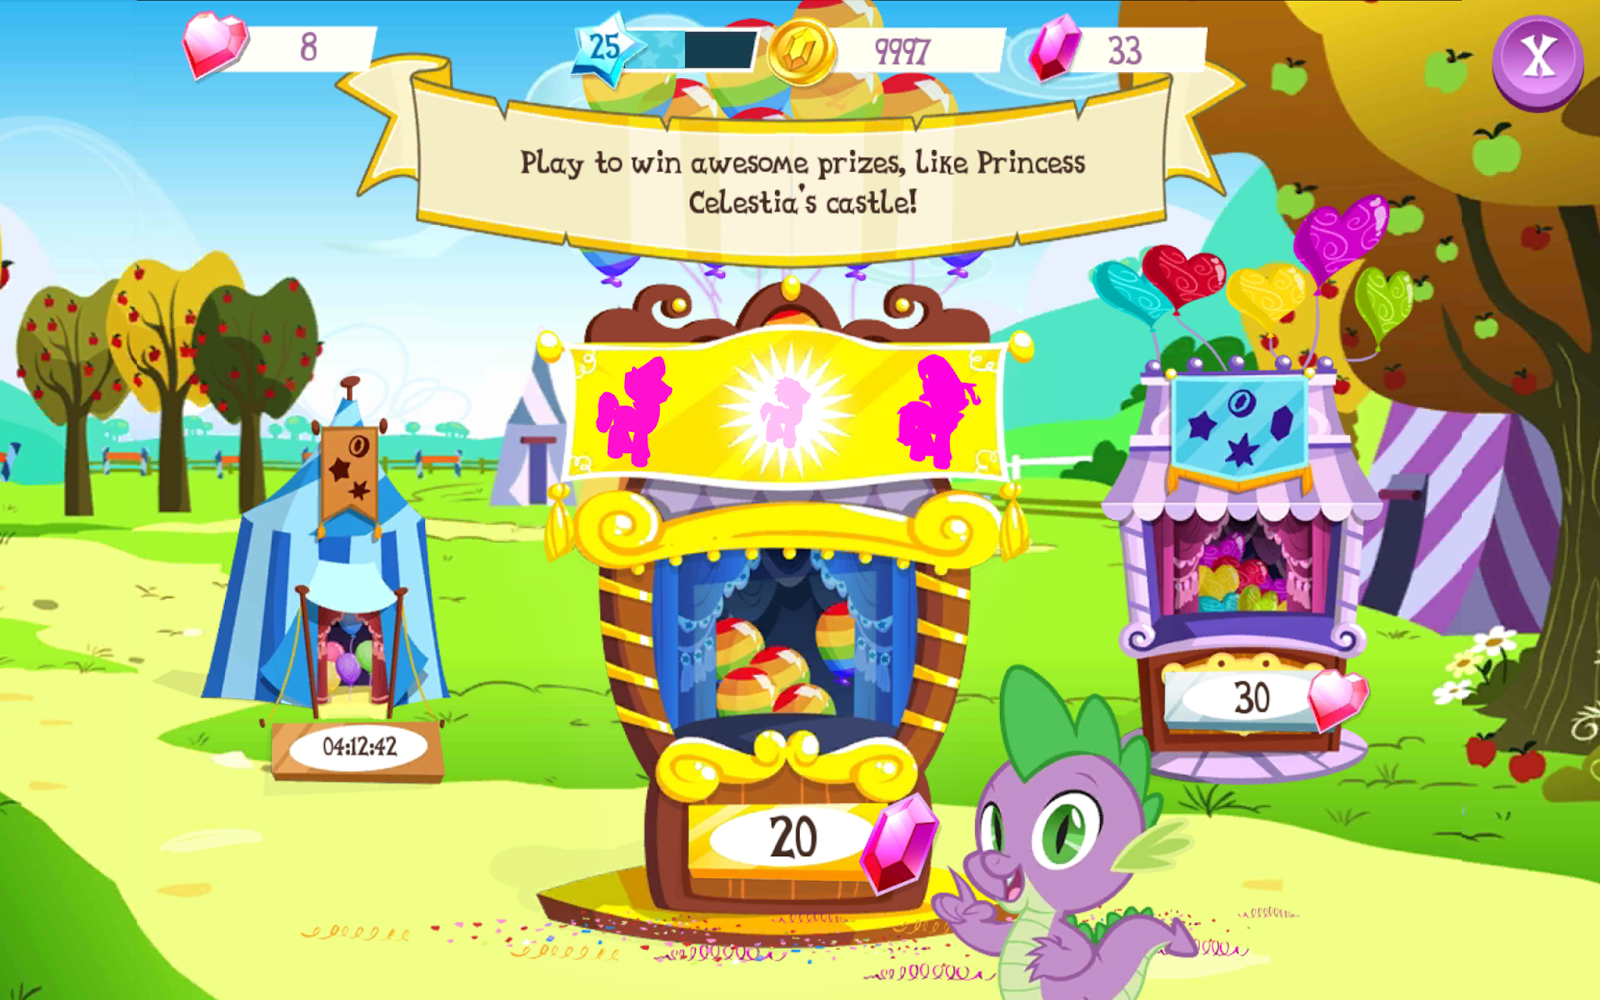 Equestria Daily - MLP Stuff!: My Little Pony Game Actually Free Starting  Guide - Newbie Tips and Early Optimization